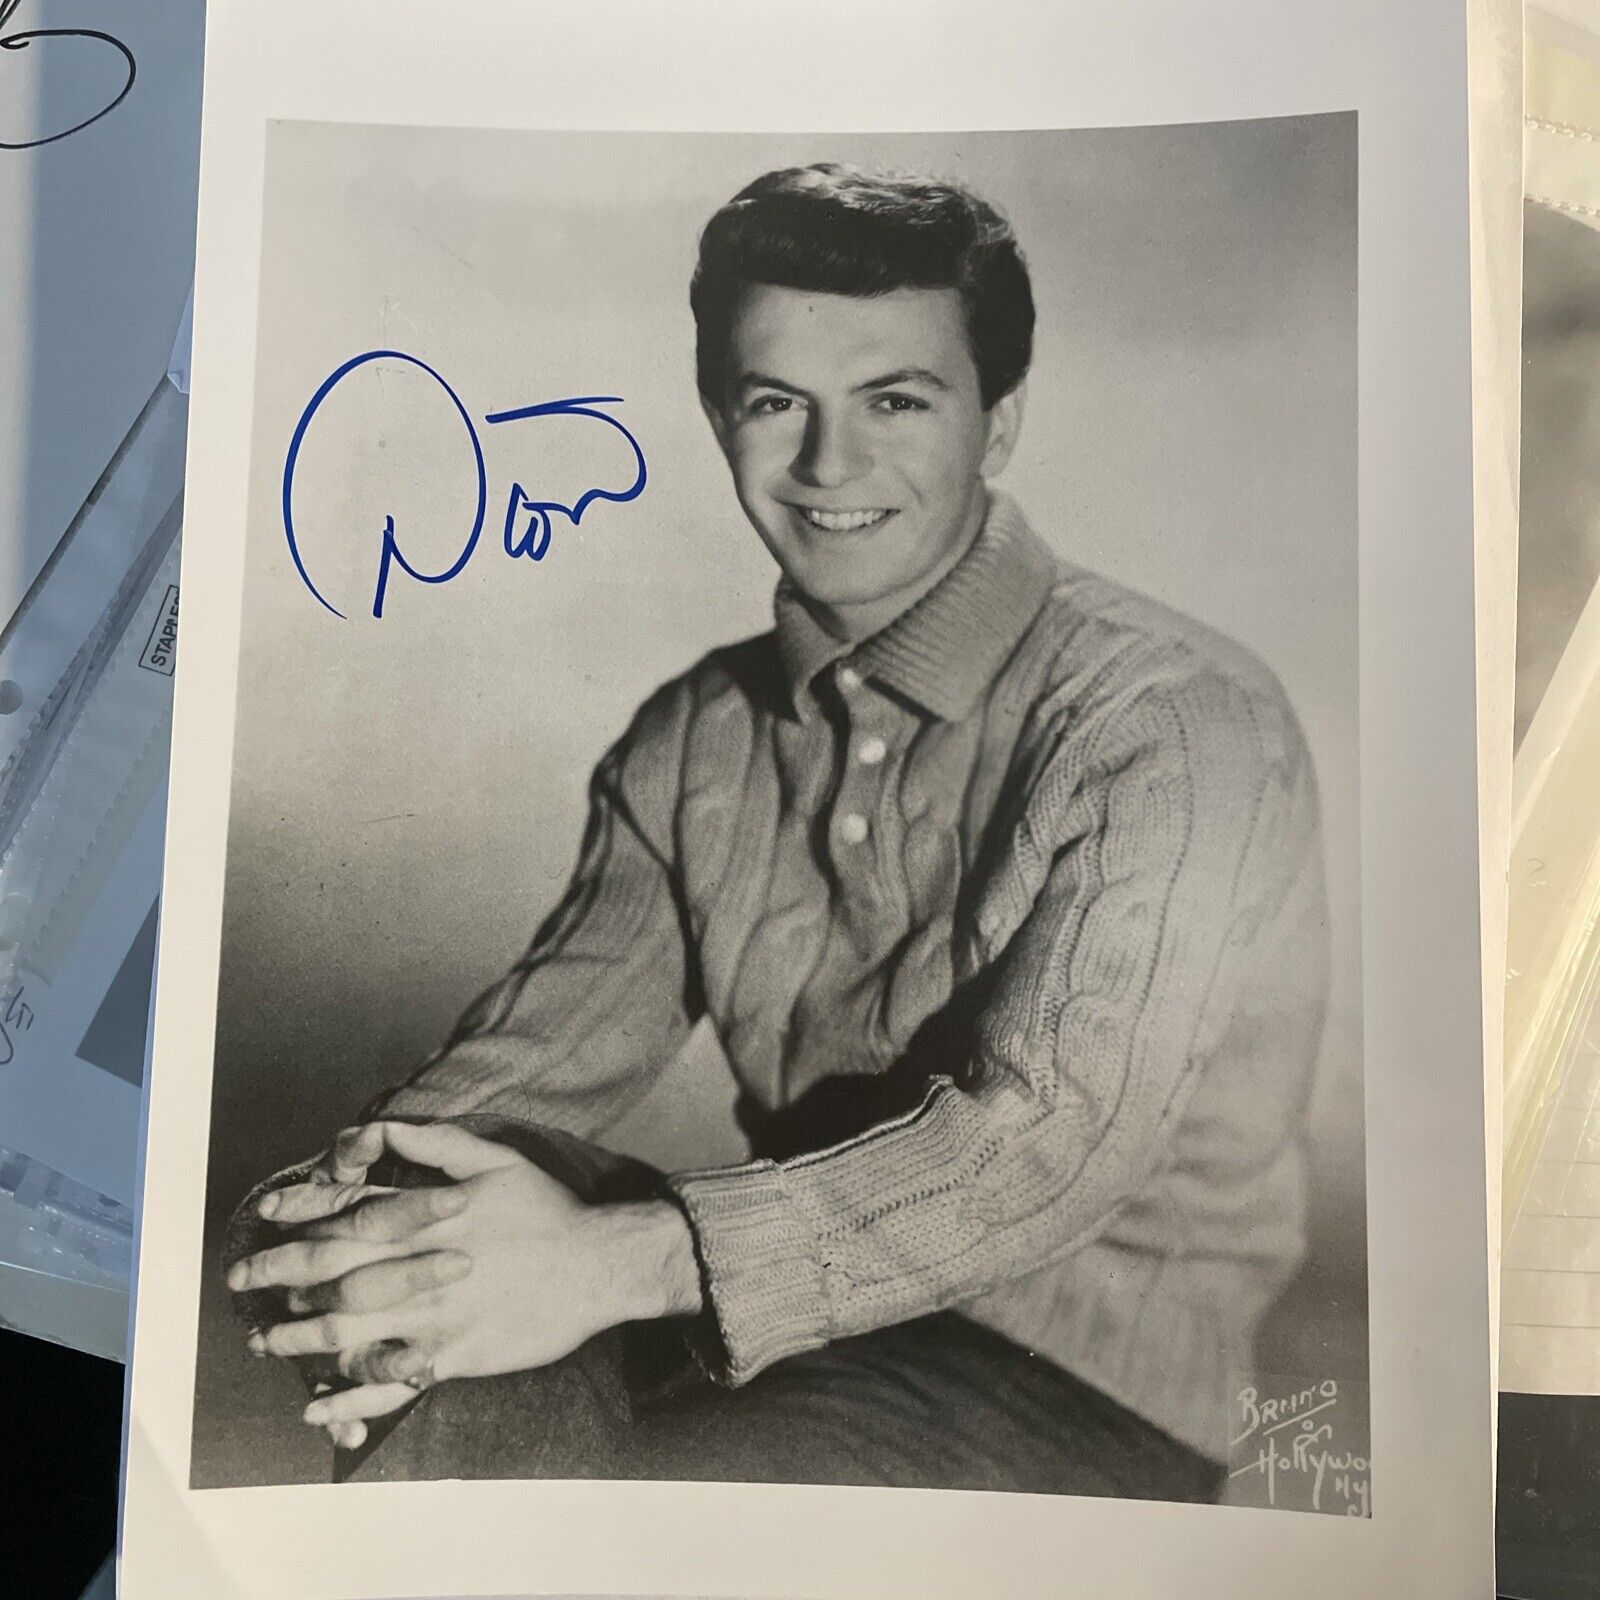 DION DI MUCCI Signed Photo Poster painting Autographed 8x10 DOO-WOP Rock BLUES Rhythm Blues COA